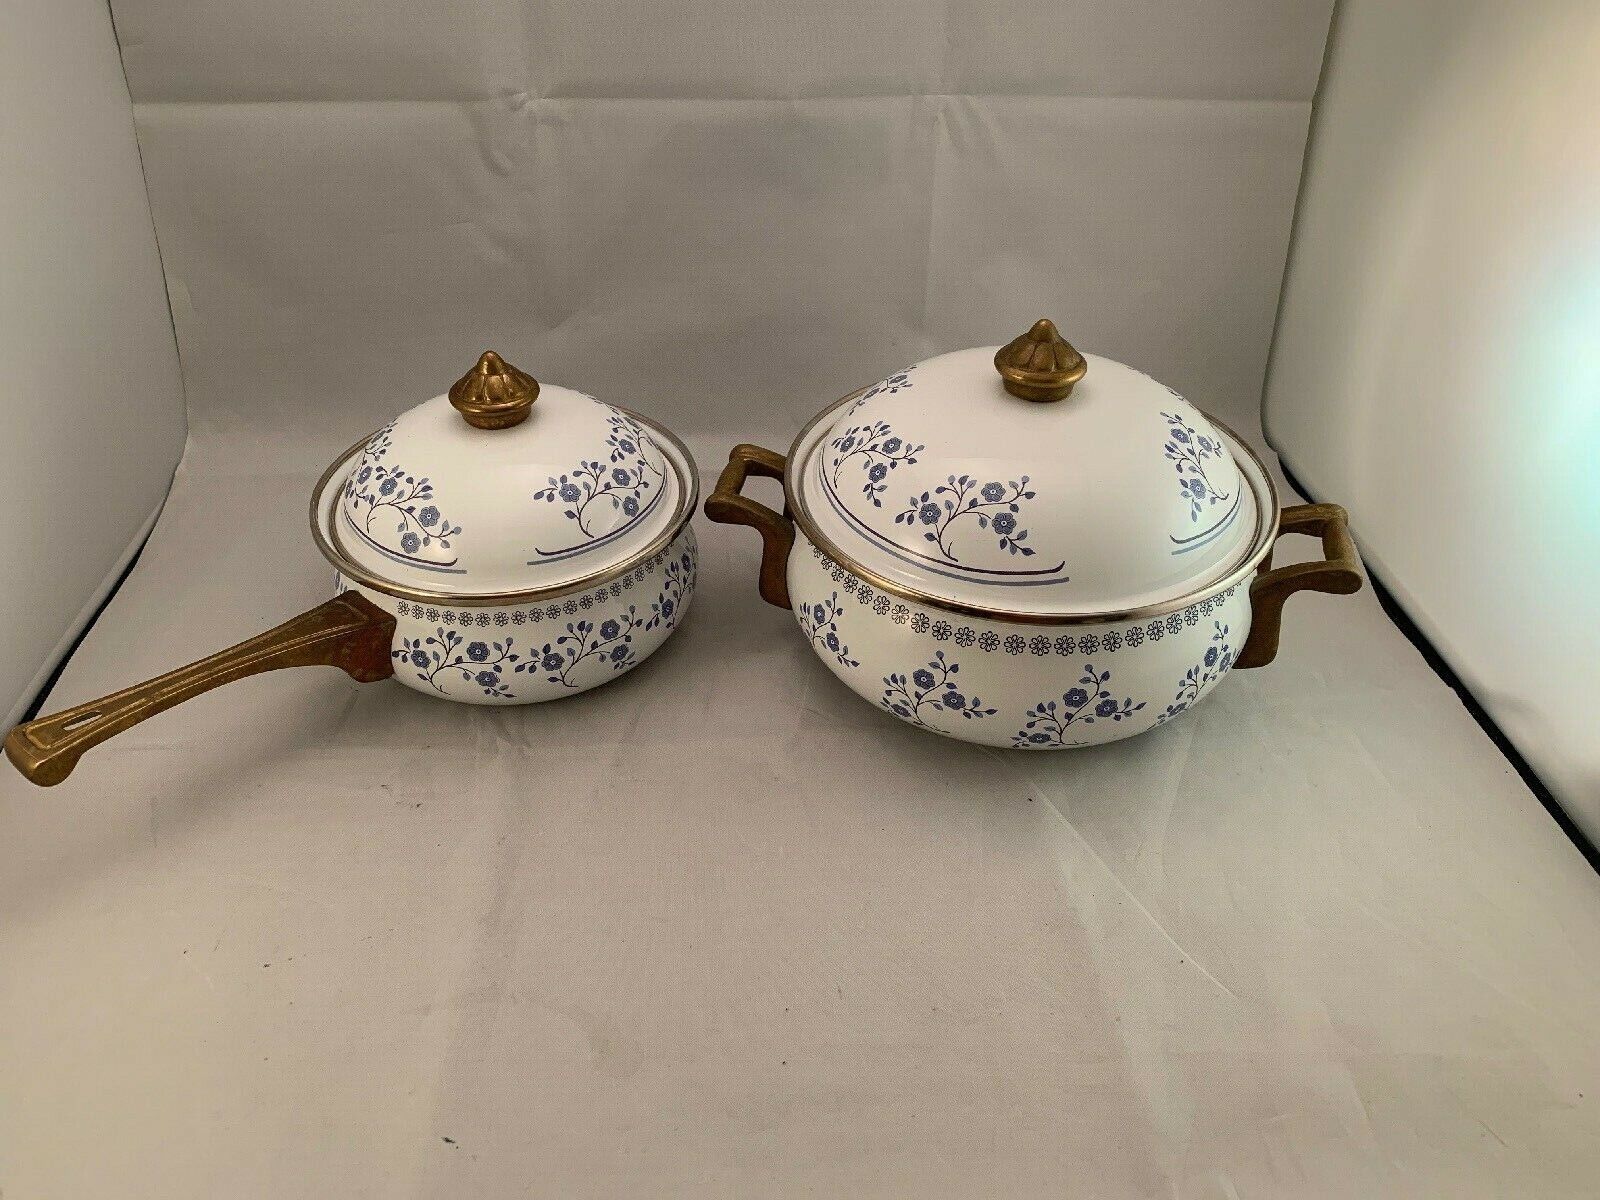 2 pc ENAMELWARE 2 QUART WHITE W/BLUE FLORAL POT WITH LID & SAUCE PAN WITH LID 